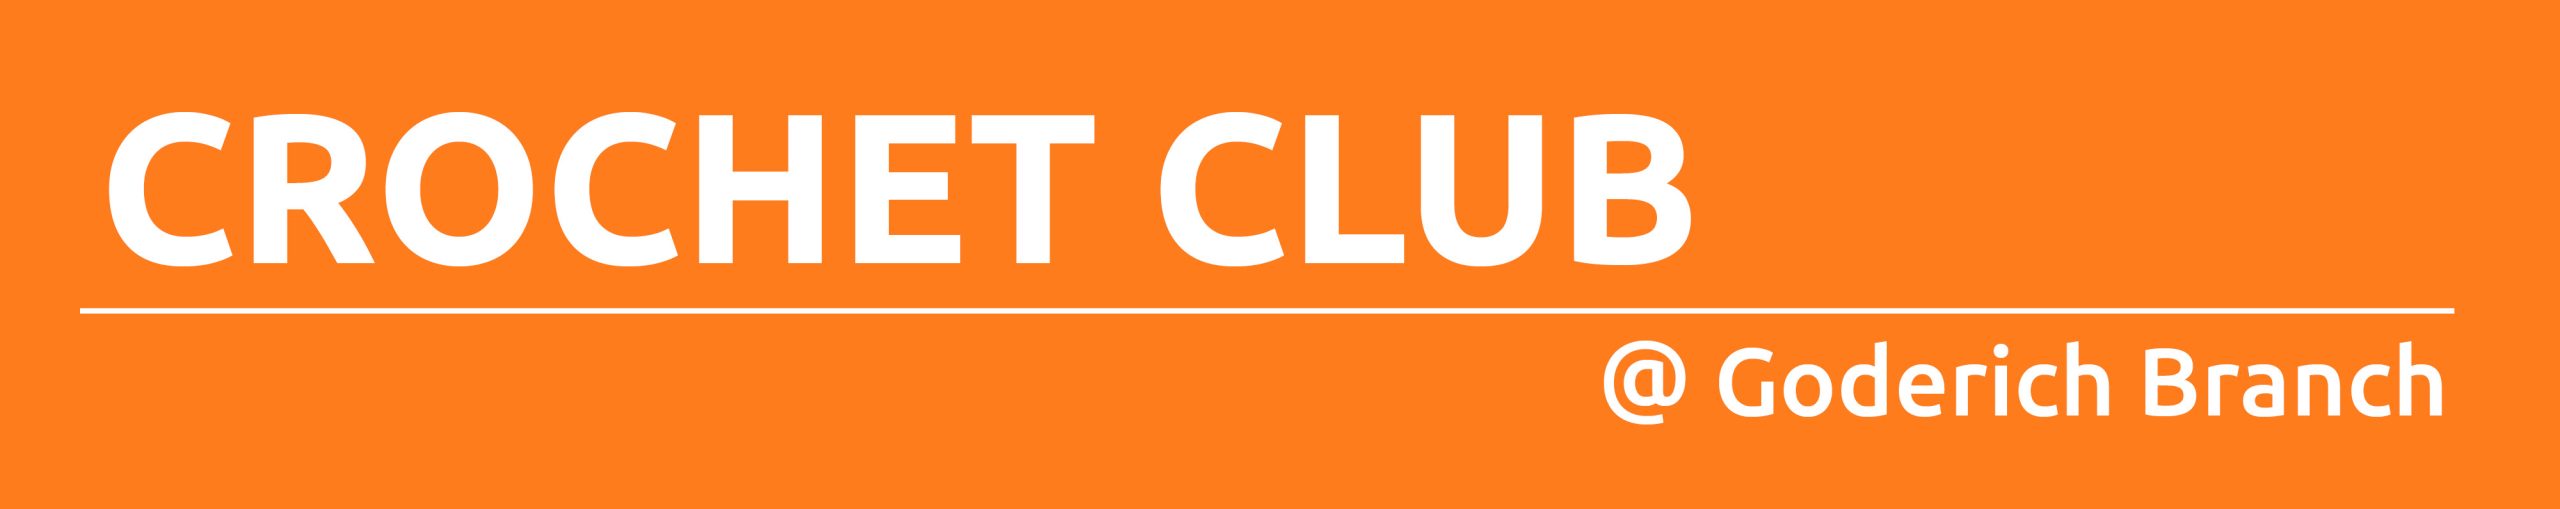 Orange rectangle with text promoting crochet club at Goderich branch